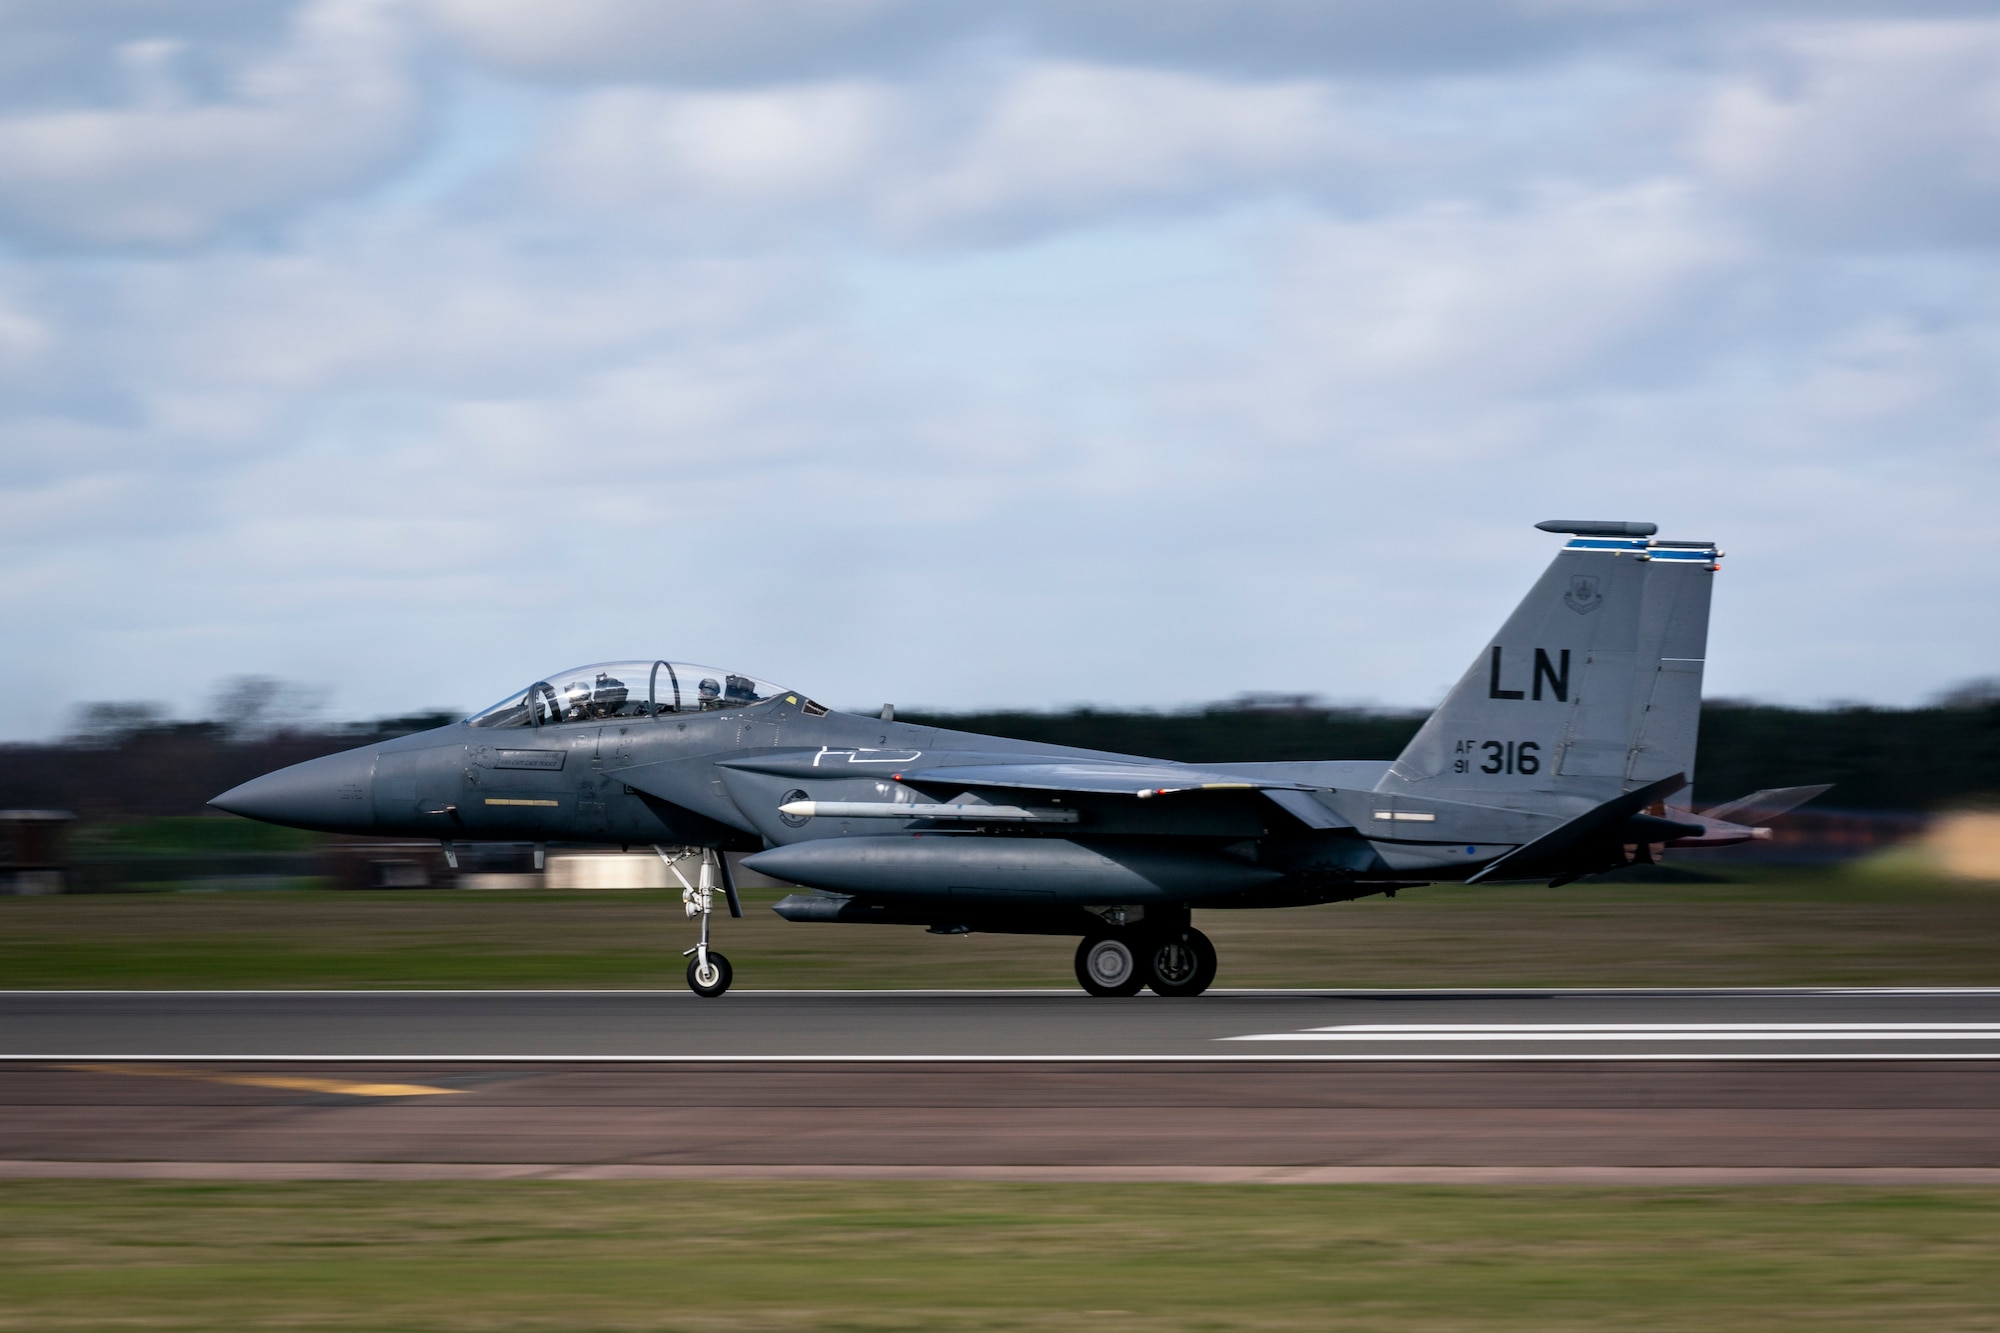 An F-15E Strike Eagle assigned to the 492nd Fighter Squadron takes off from Royal Air Force Lakenheath, England, in support of exercise Valiant Liberty, March 12, 2020. The training was designed to increase the Liberty Wing's capability to rapidly support joint operations, enabling U.S. and allied forces to deter, defend and win across the spectrum of conflict. (U.S. Air Force photo by Staff Sgt. Rachel Maxwell)